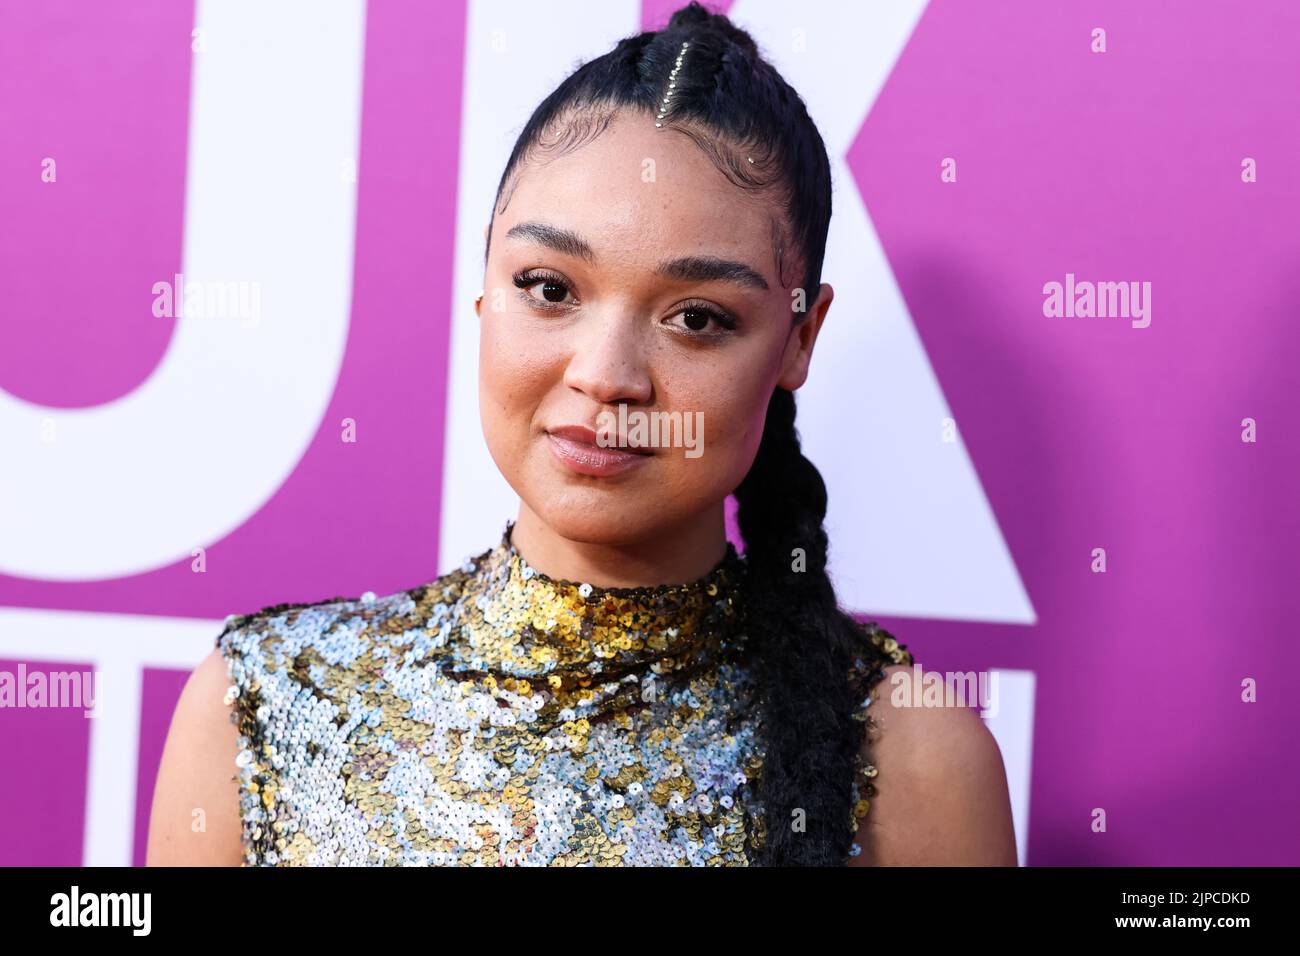 HOLLYWOOD, LOS ANGELES, CALIFORNIA, USA - AUGUST 16: Australian actress Aisha Dee arrives at the Los Angeles Premiere Of Netflix's 'Look Both Ways' held at the Netflix Tudum Theater on August 16, 2022 in Hollywood, Los Angeles, California, United States. (Photo by Xavier Collin/Image Press Agency) Stock Photo